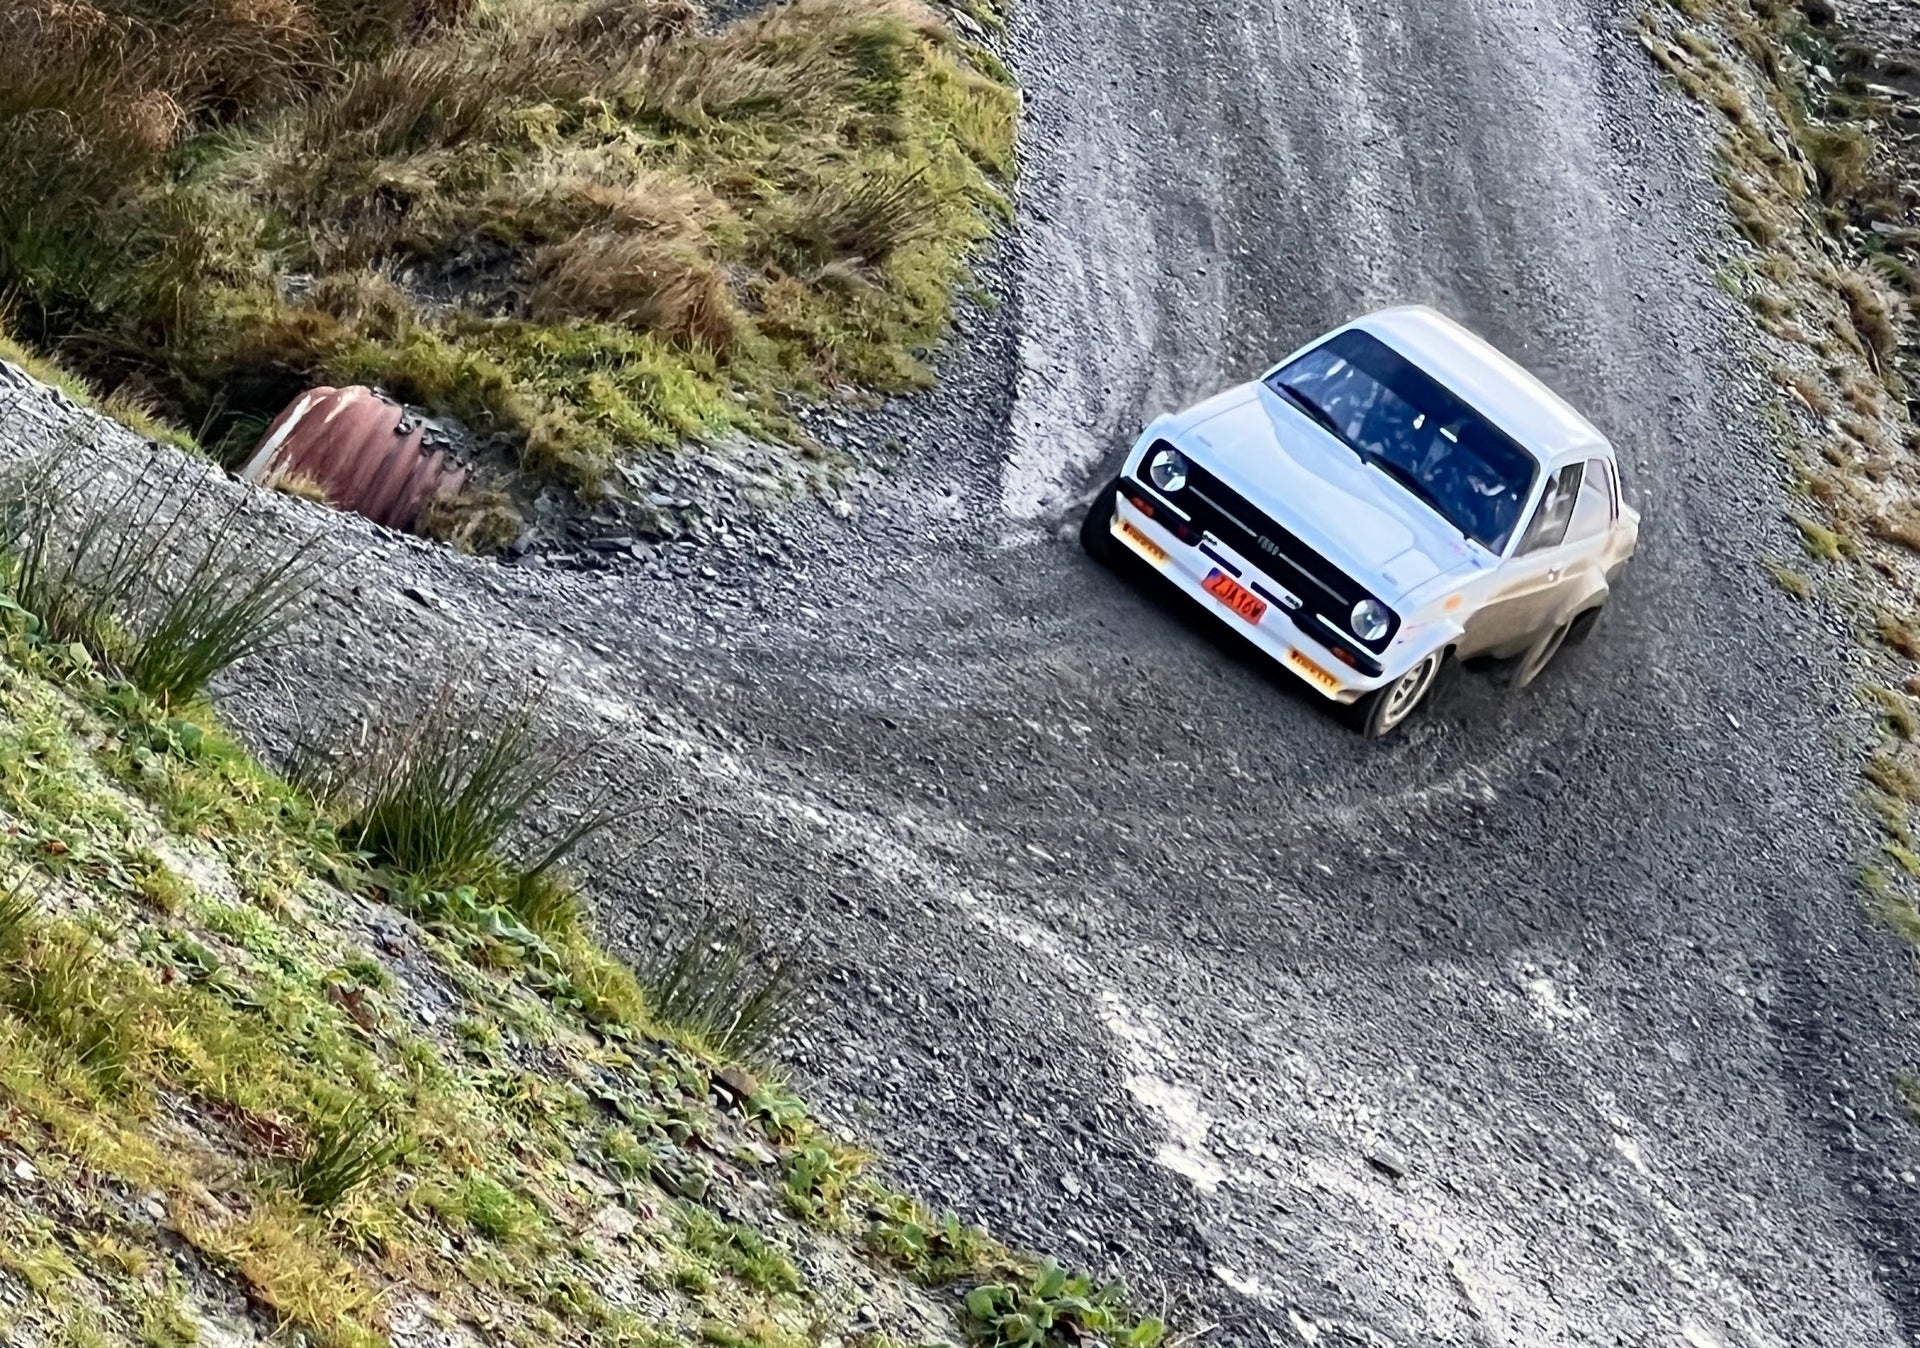 VIDEO: DirtFish - Oliver Solberg RAC Rally Test Action